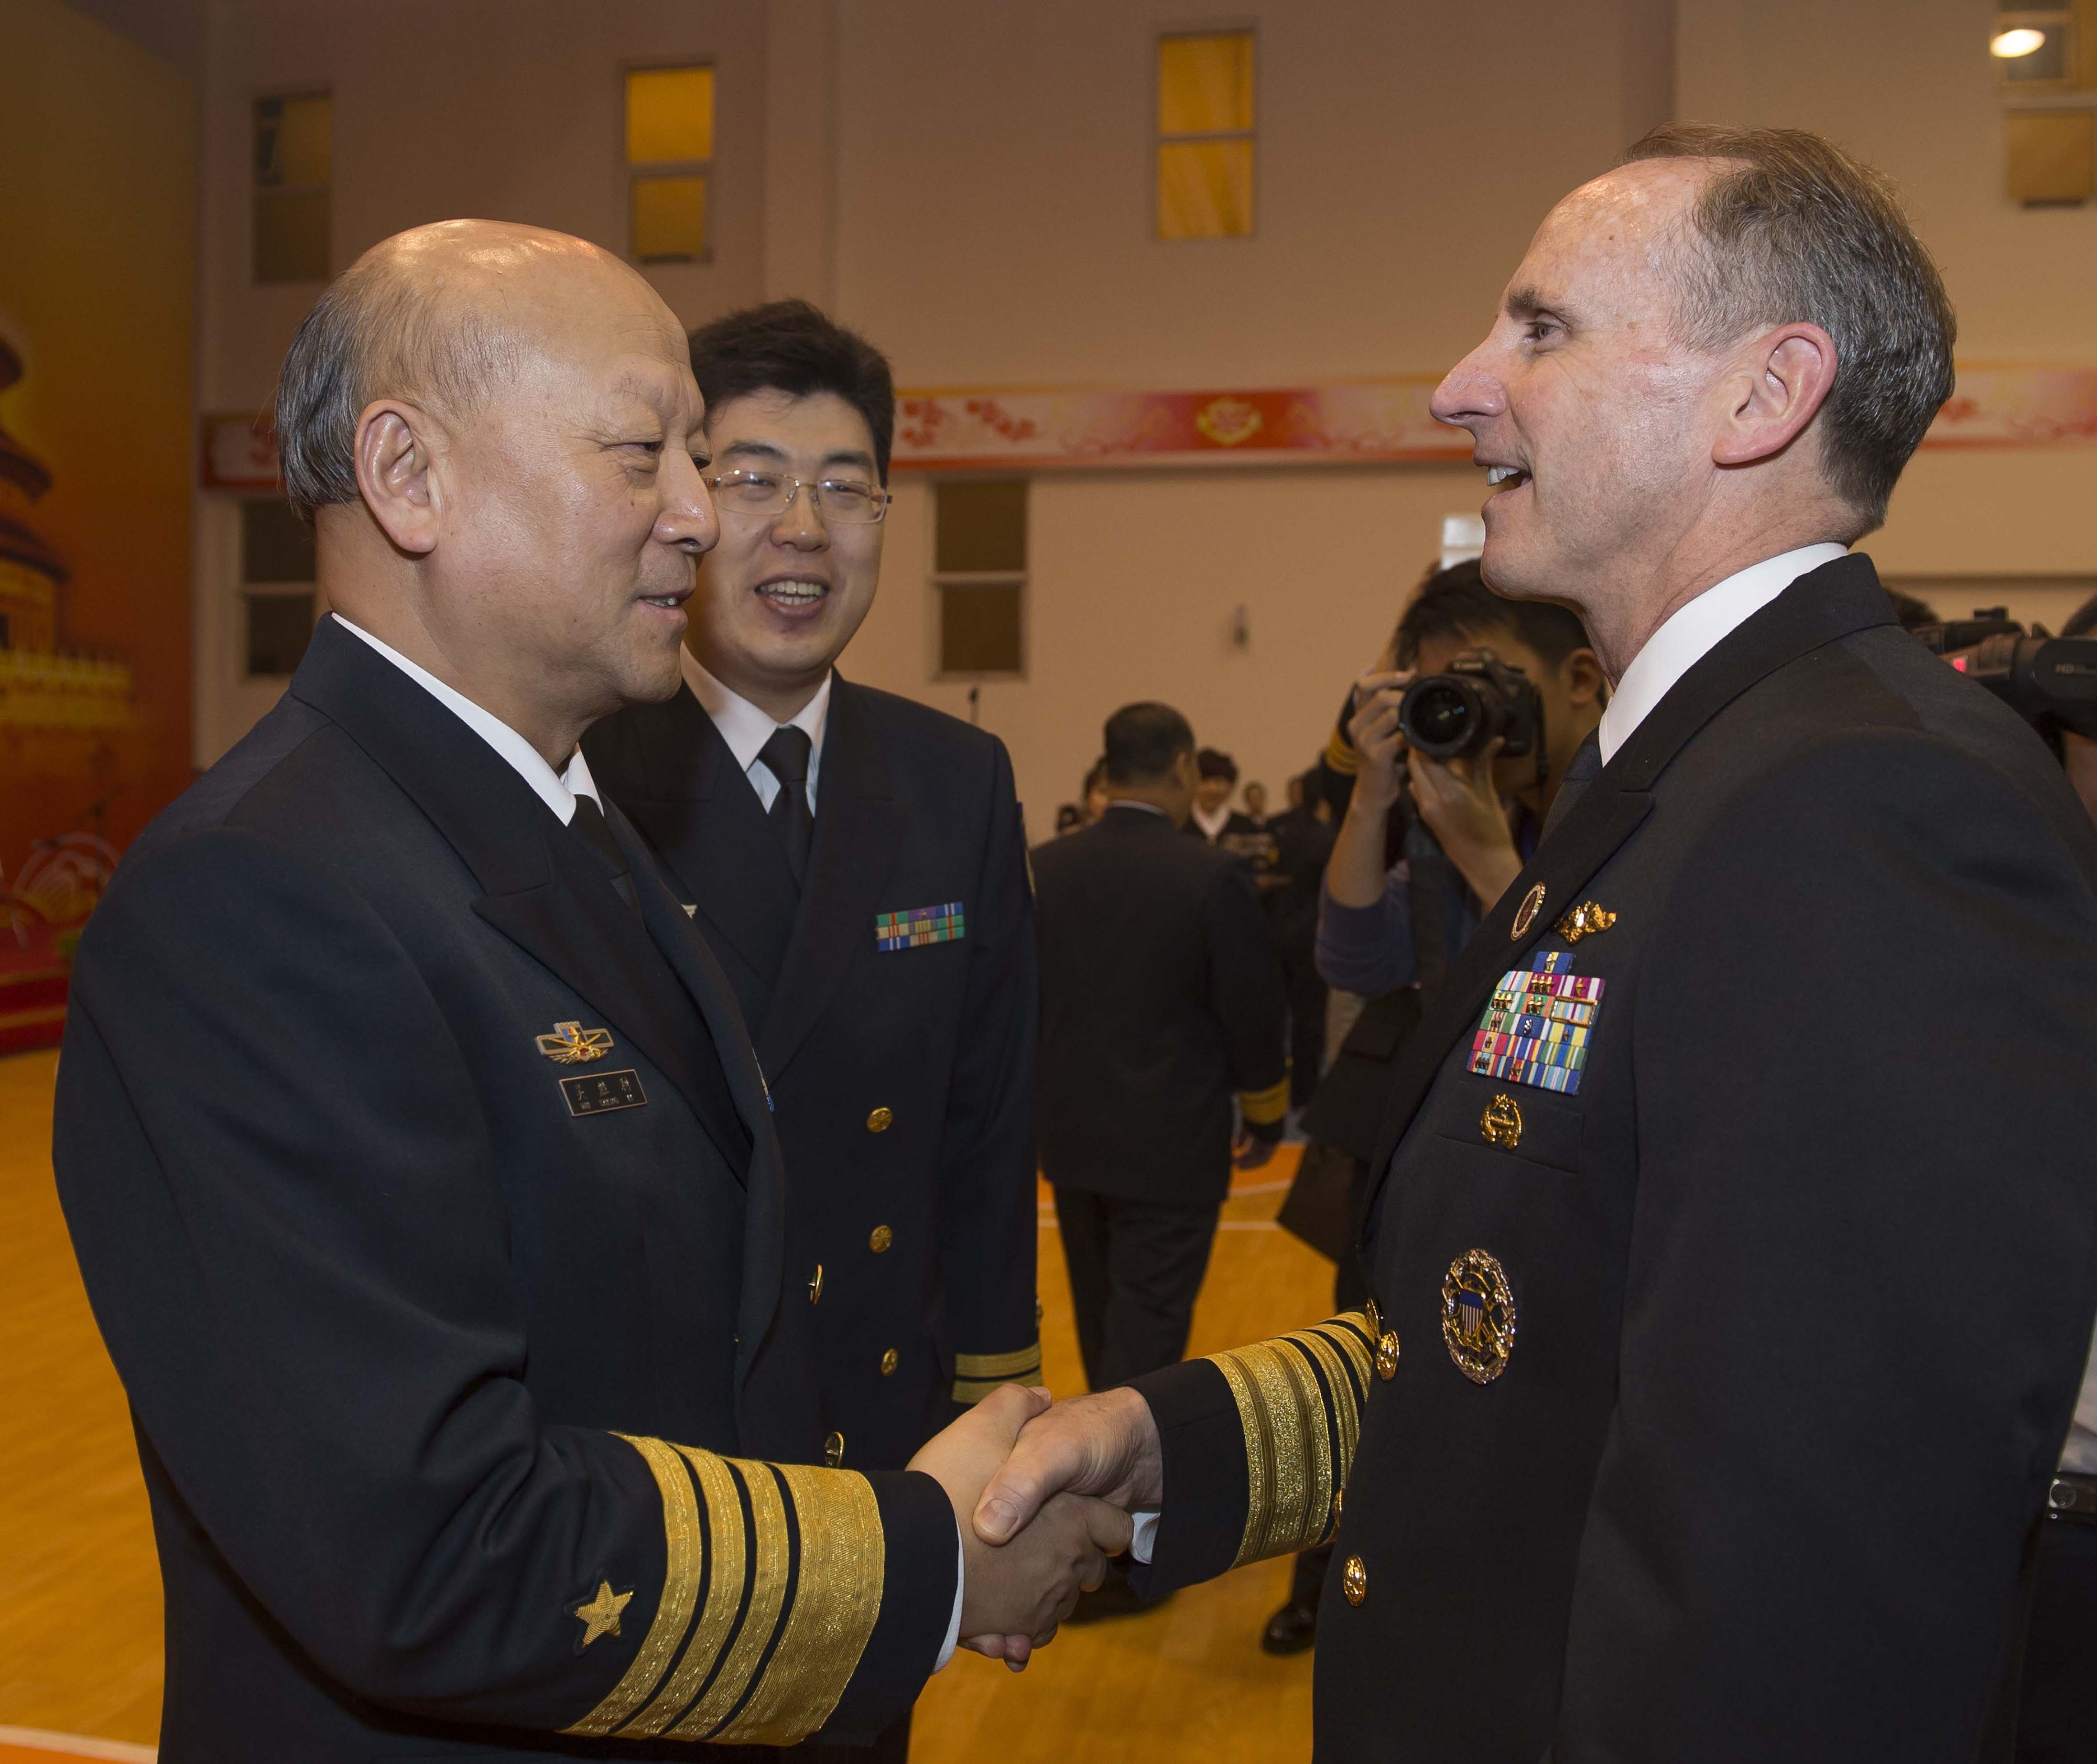 Chief of Naval Operations (CNO) Adm. Jonathan Greenert and Chief of Navy of the People's Liberation Army Navy (PLAN) Adm. Wu Shengli greet each other in Qingdao, China on April 21, 2014. US Navy Photo